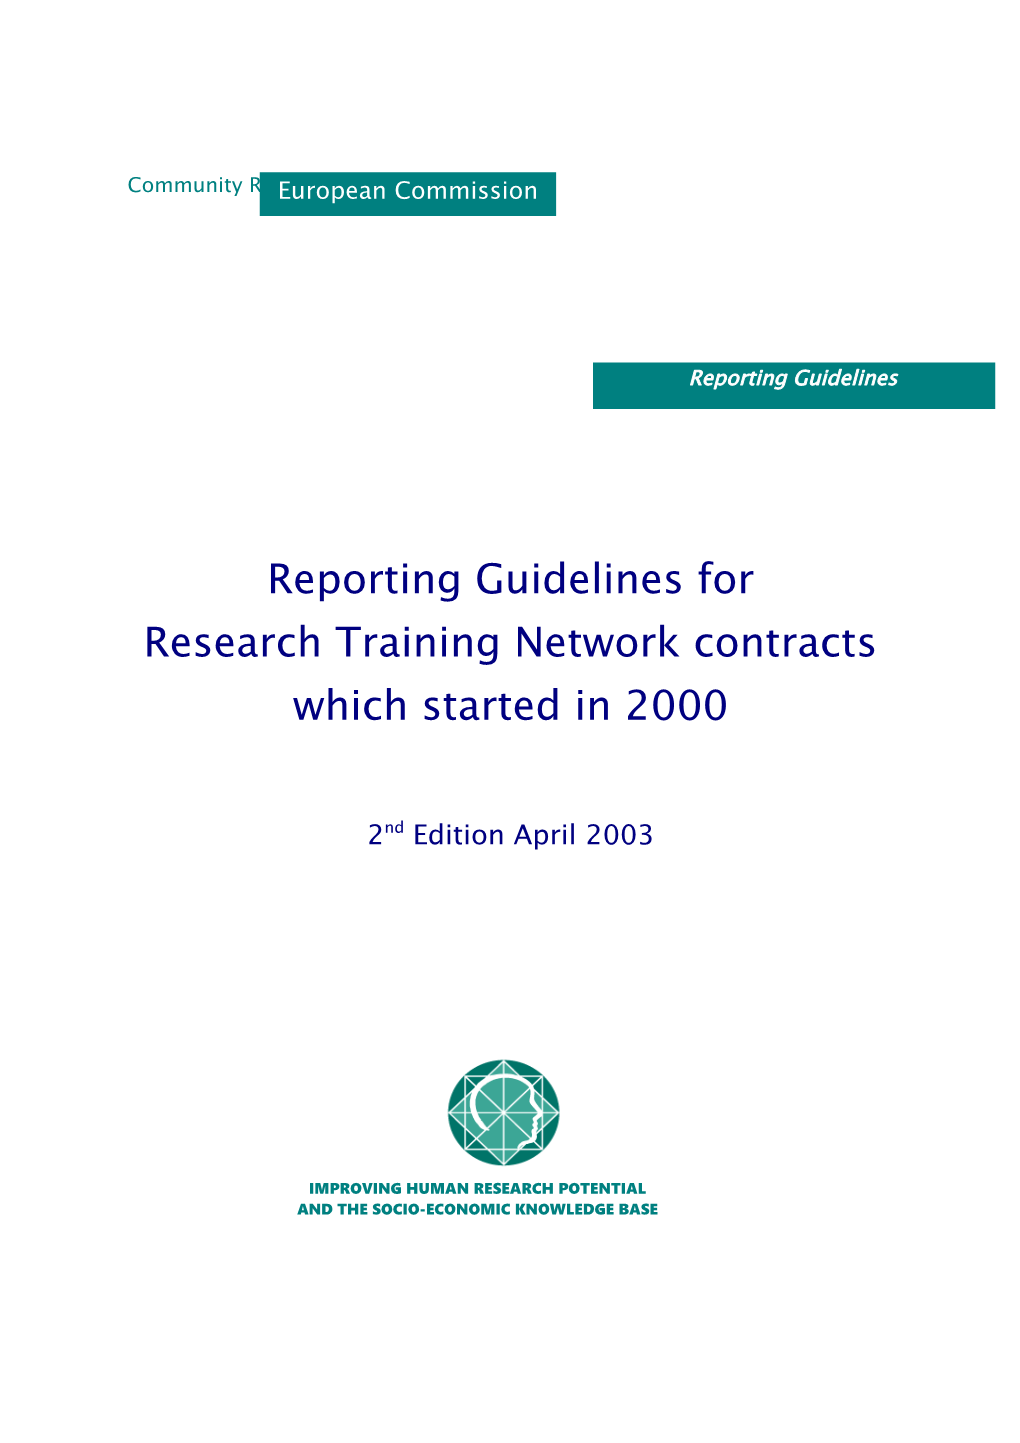 IHP 2000 Reporting Guidelines